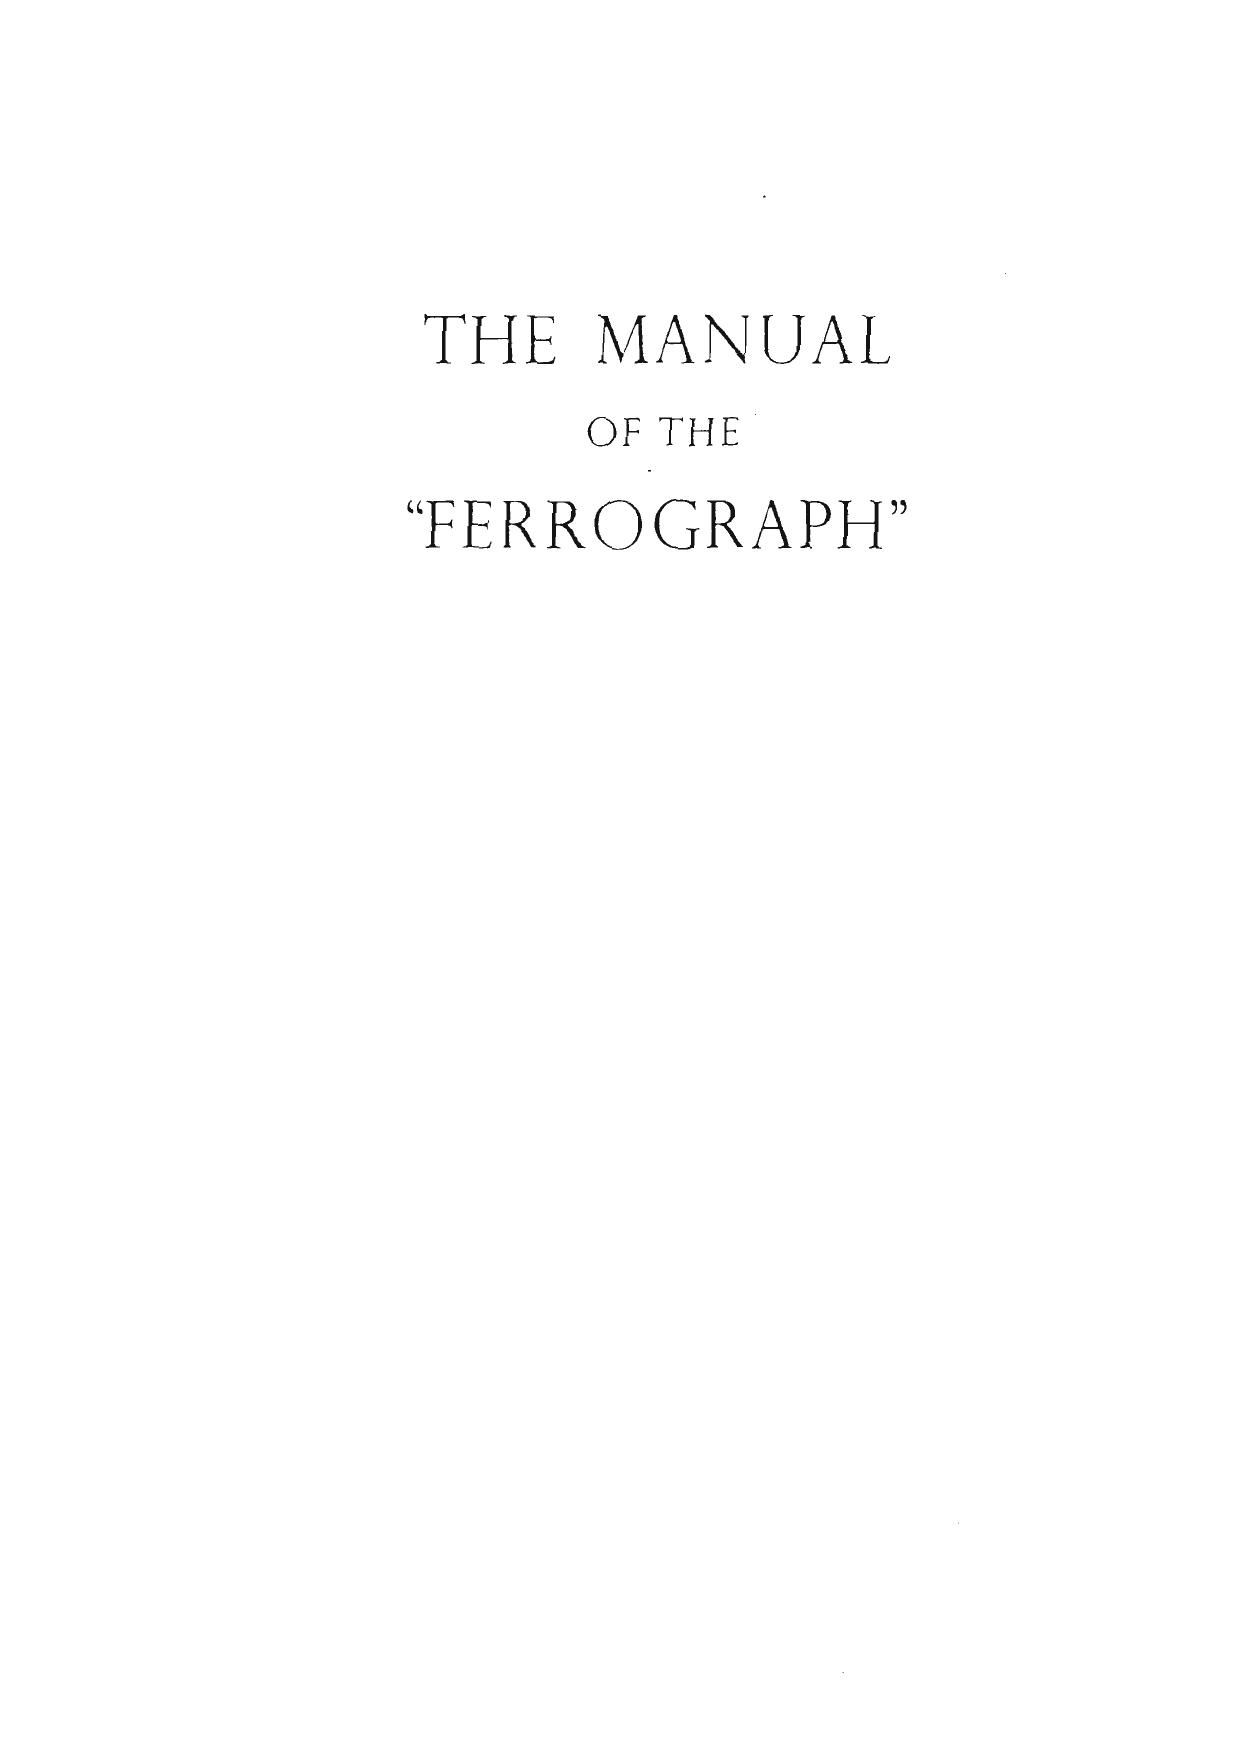 Ferrograph 4 A Owners Manual